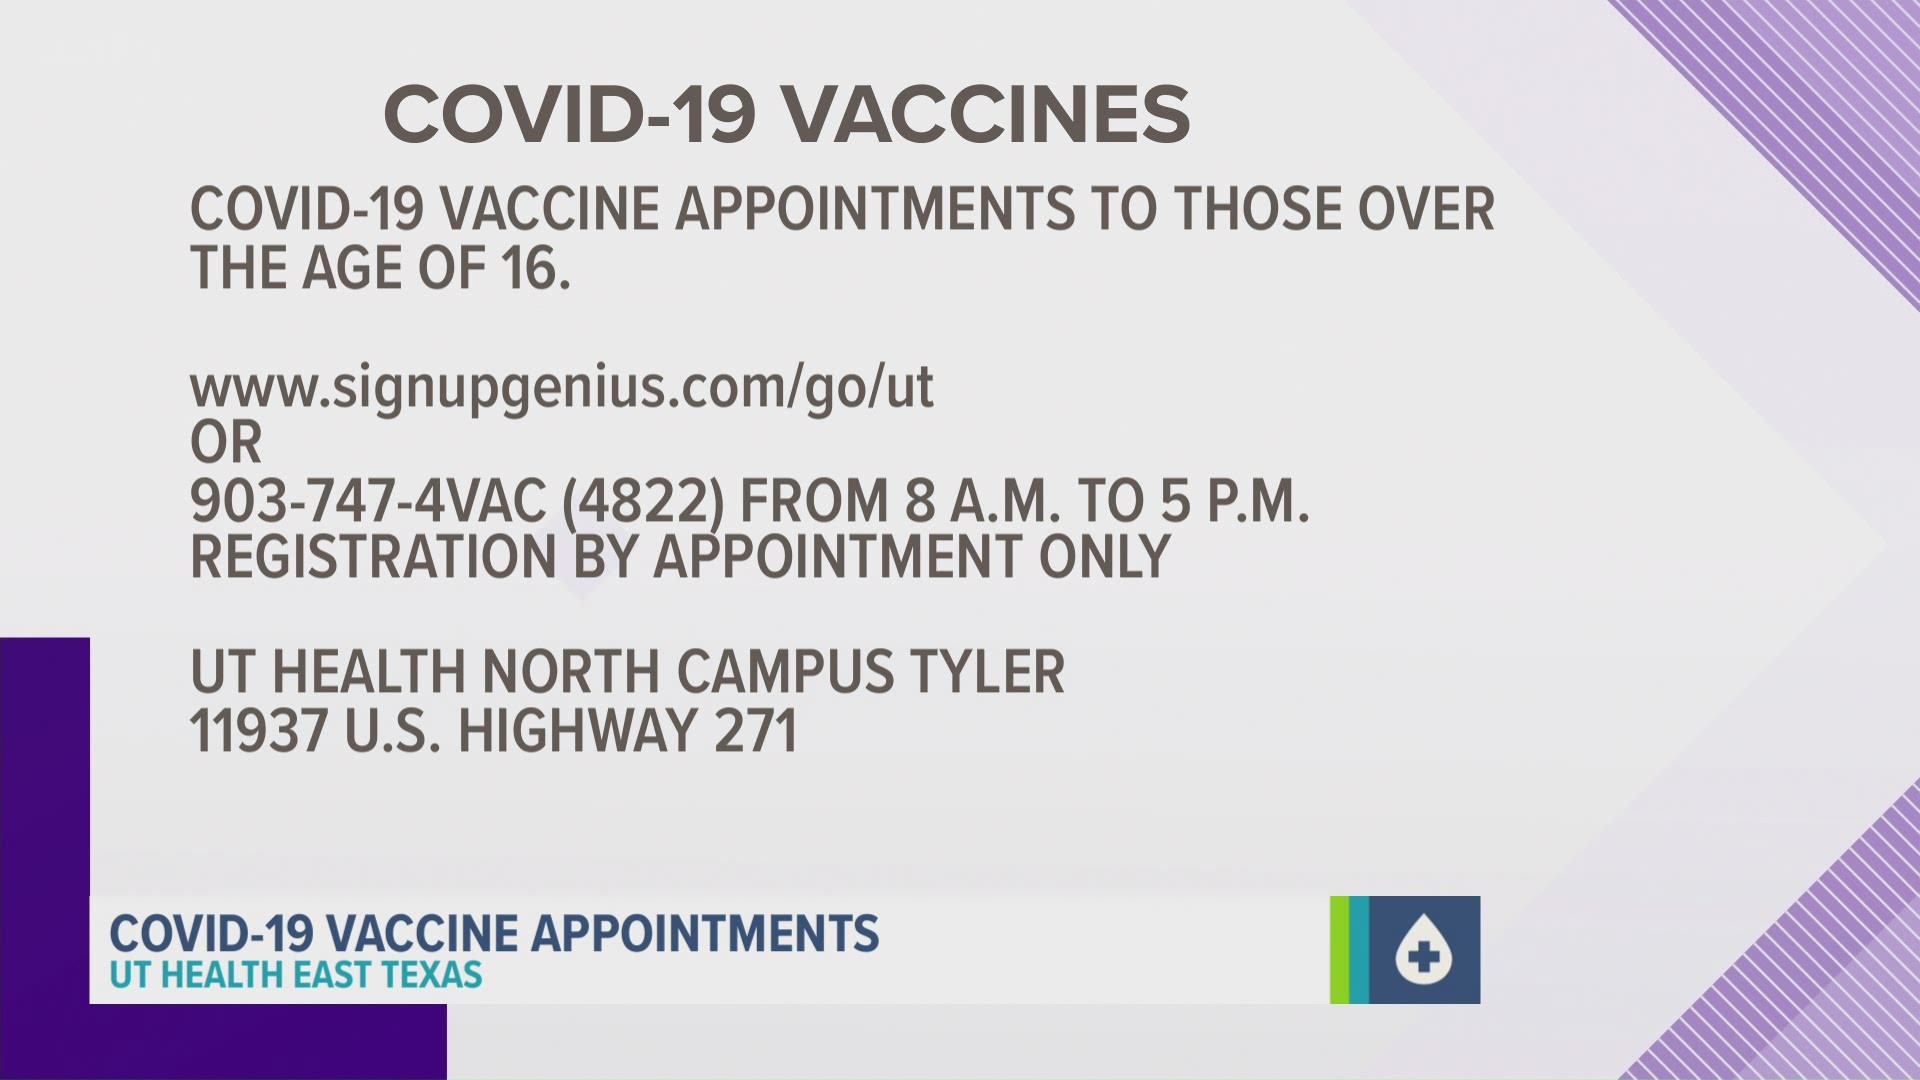 On March 29, the COVID-19 vaccine will be available to all Texans 16 and older.